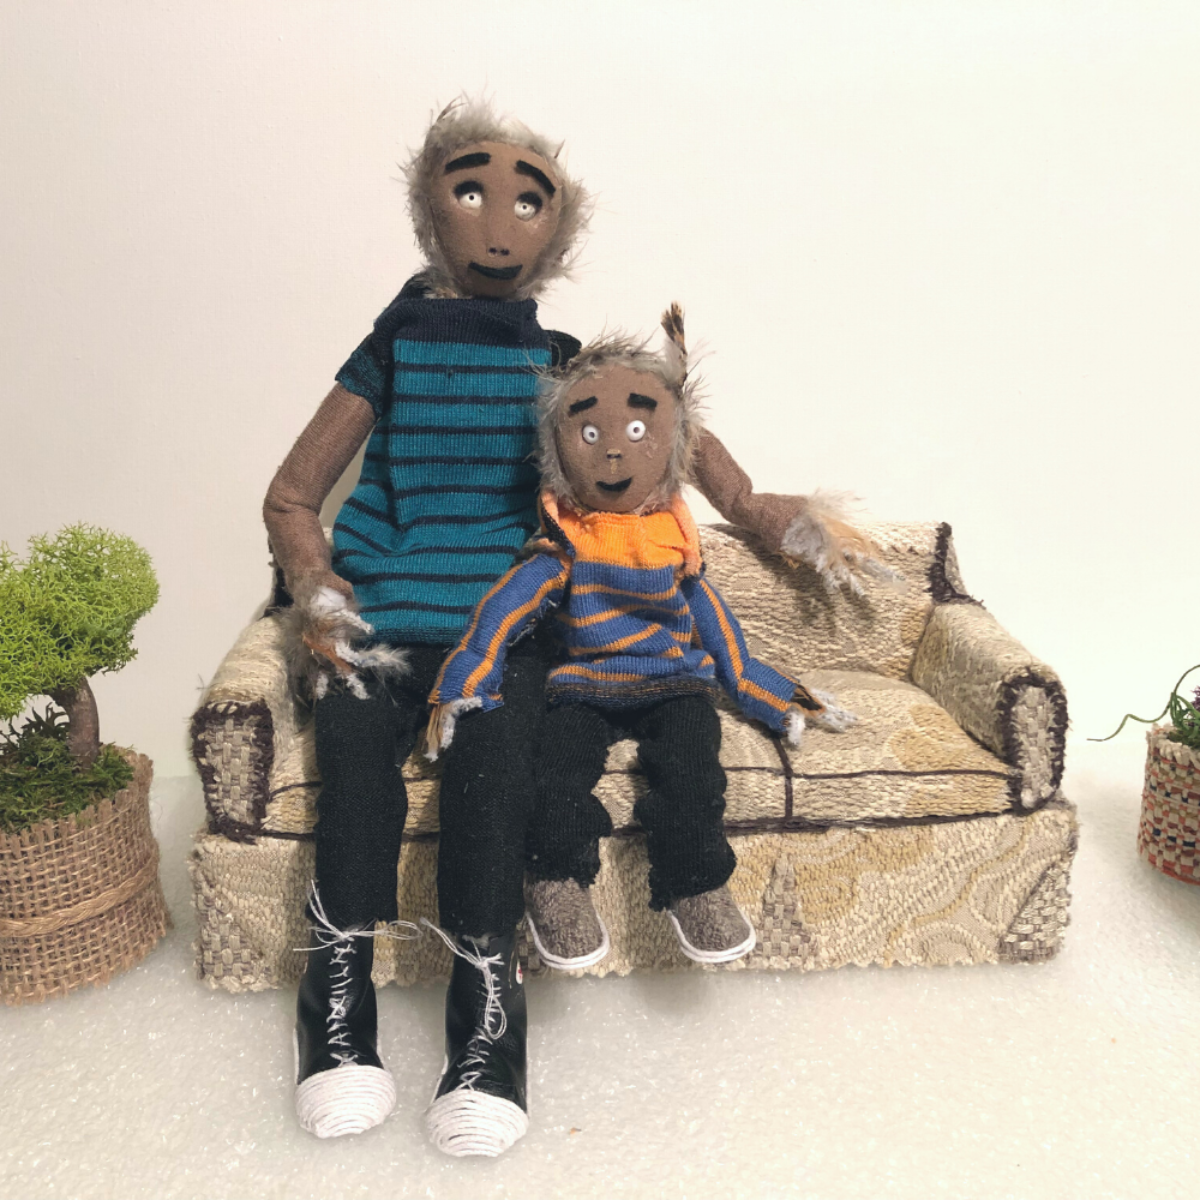 Two miniature stuffed figurines sit closely together on an old-fashioned miniature couch. The older one is wearing a blue shirt with black stripes, black pants, and white and black shoes. The younger one is wearing a blue and orange striped long-sleeve shirt, black pants, and grey and white shoes. On each end of the couch, there is a plant in a wicker basket.